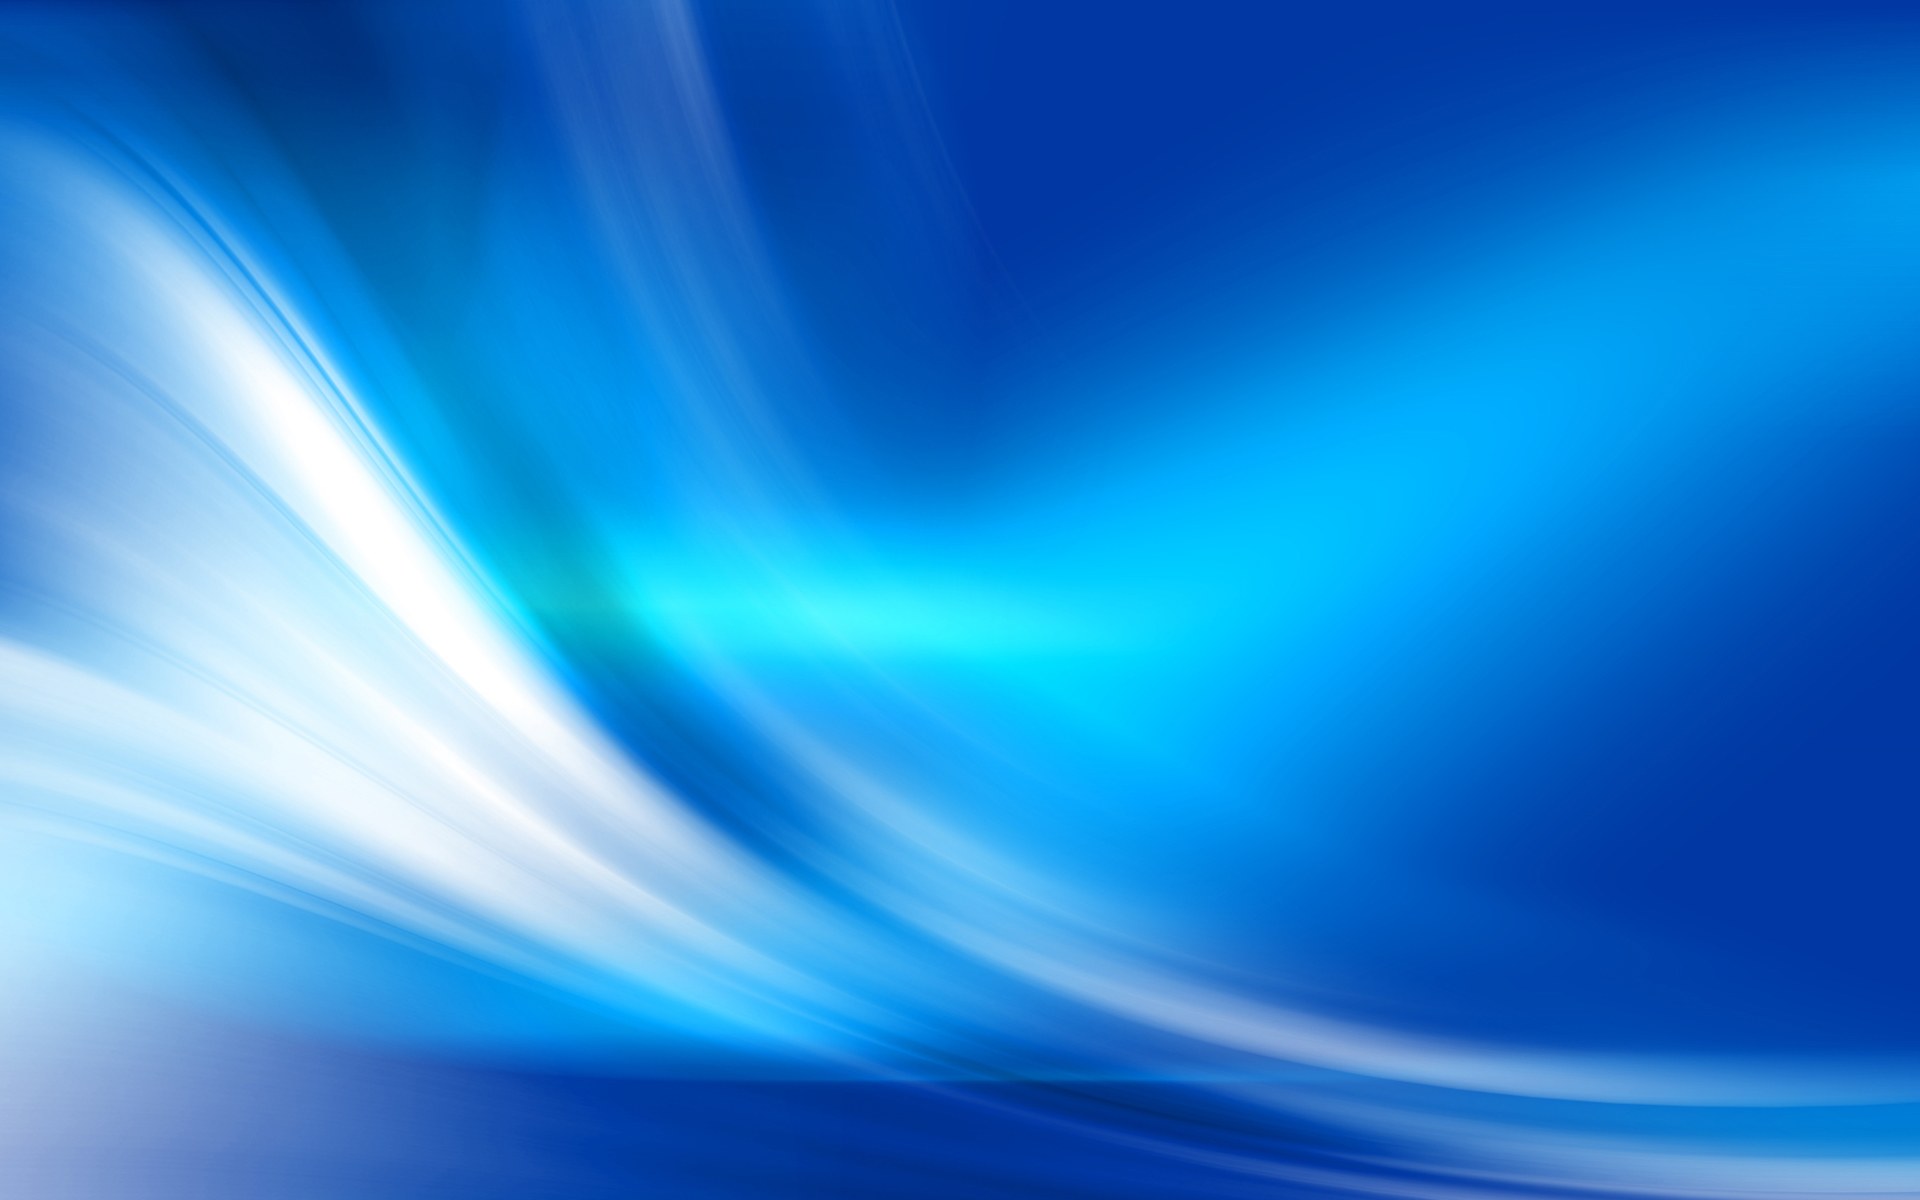 blue background iphone hd is high definition wallpaper you can 1920x1200